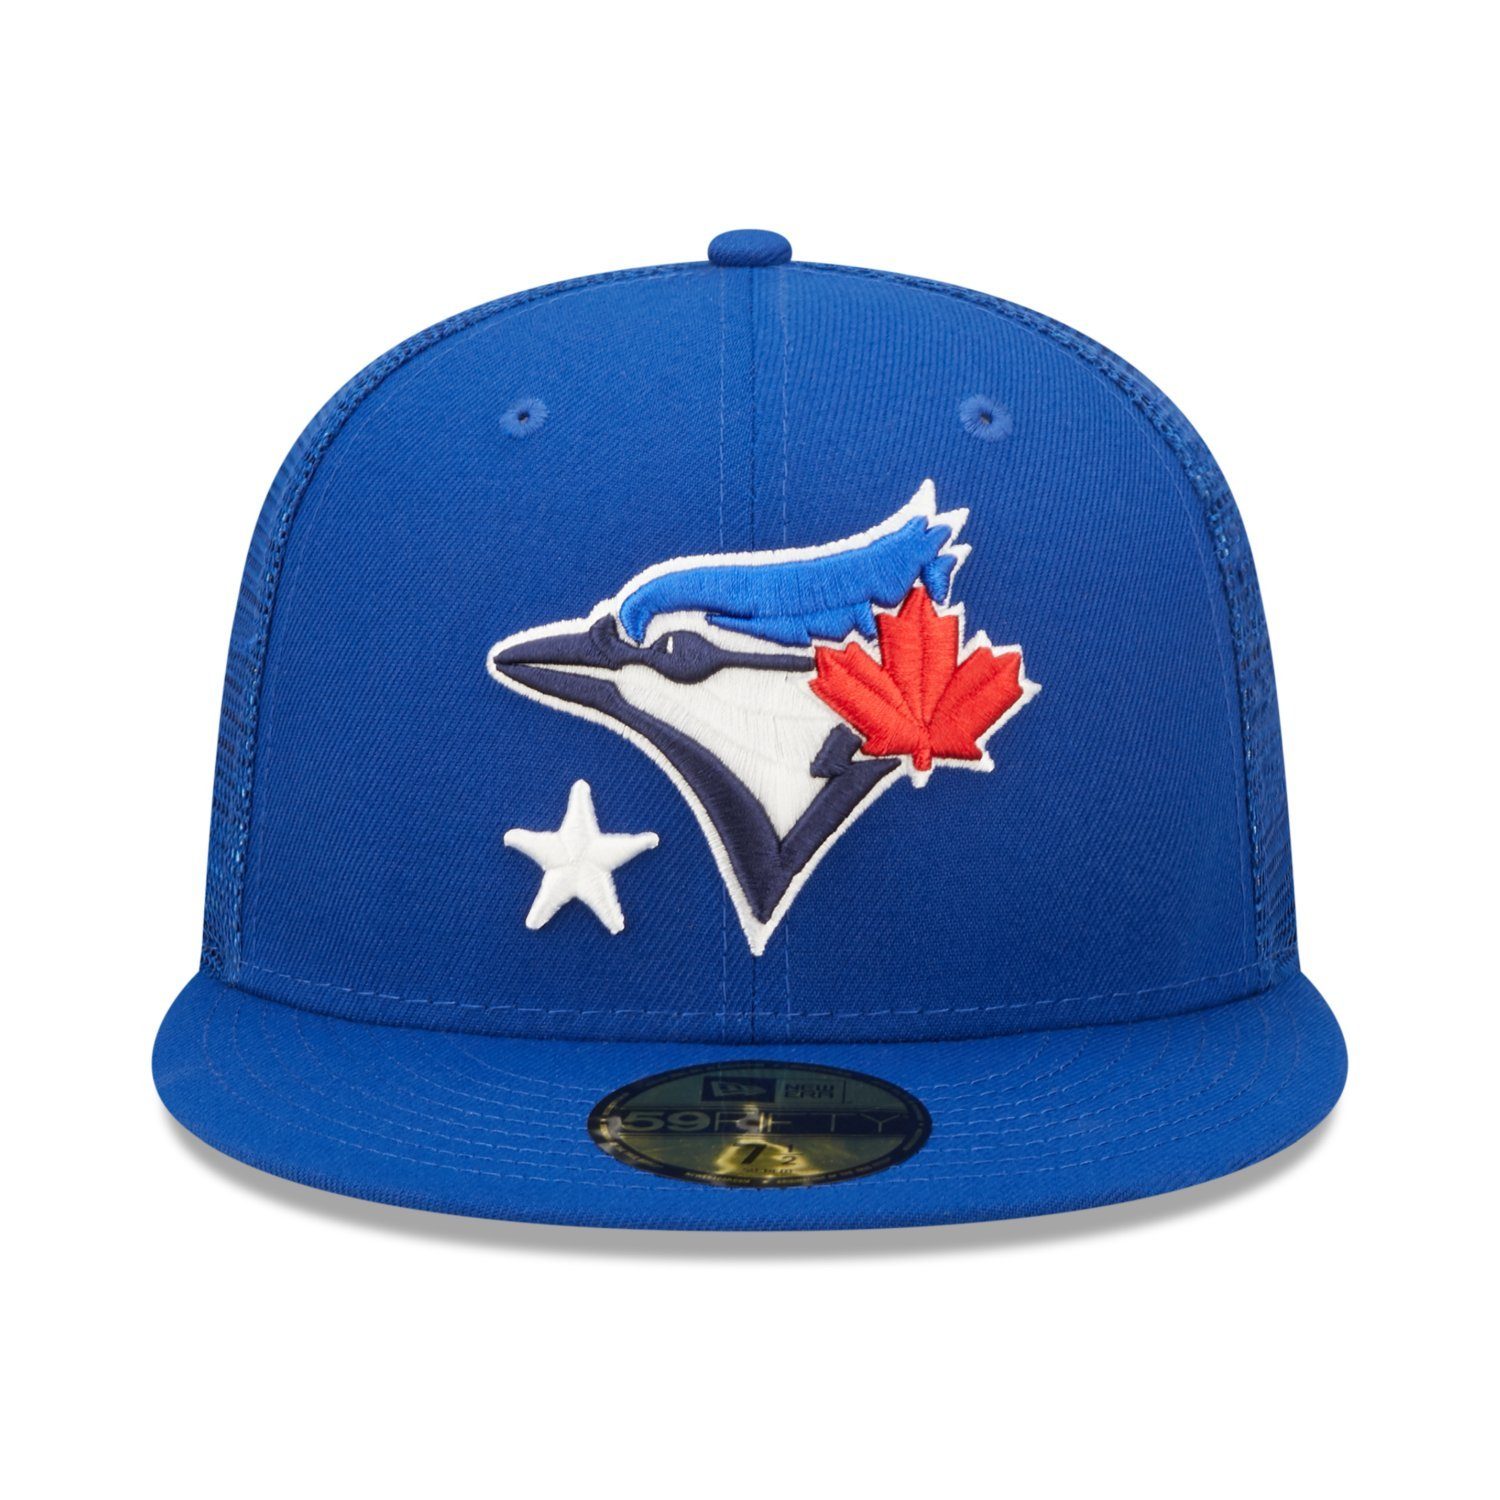 New Era Fitted ALLSTAR GAME 59Fifty Cap Toronto Jays